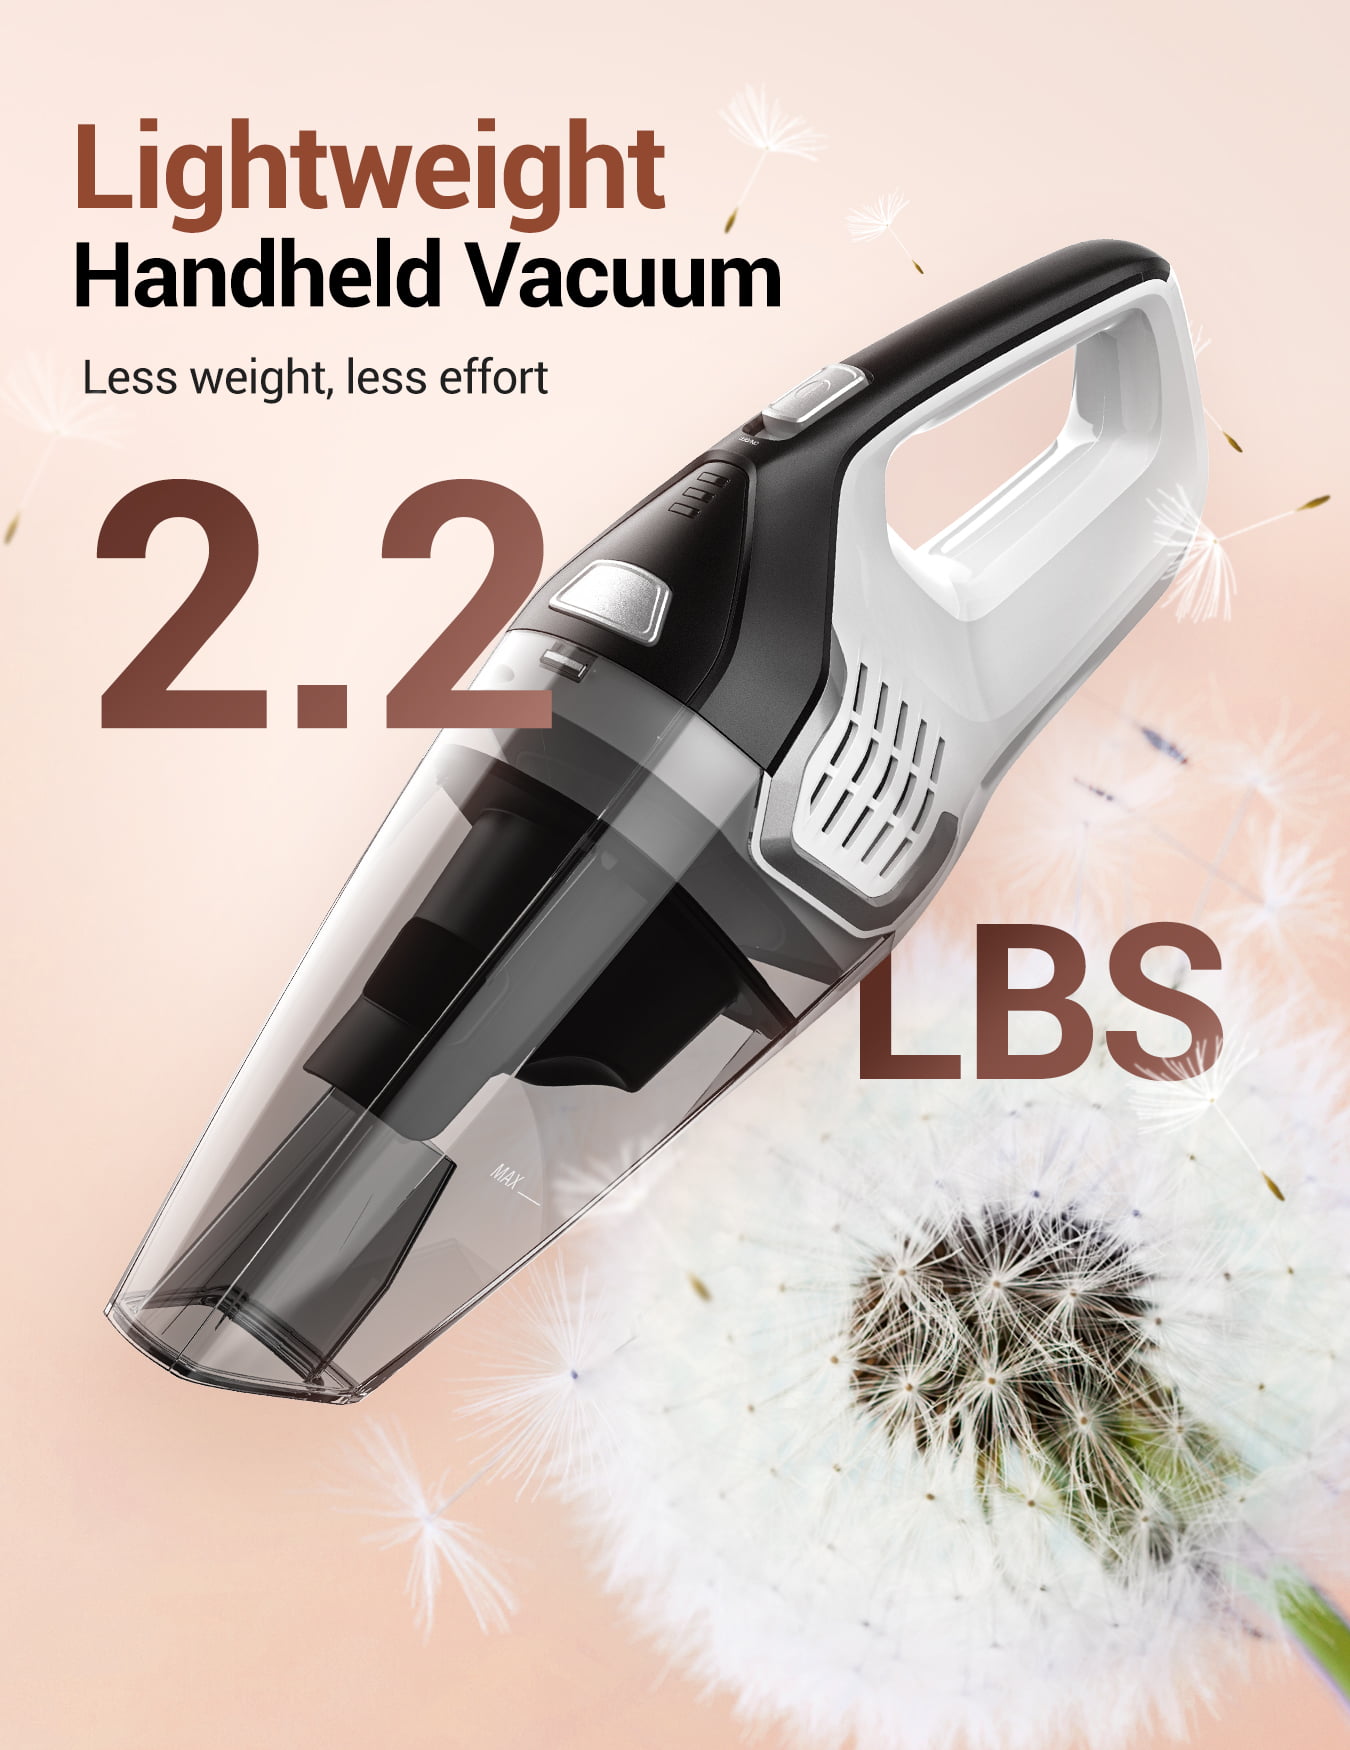 Replacement filters for my handheld vacuum? Brand is Homasy but I